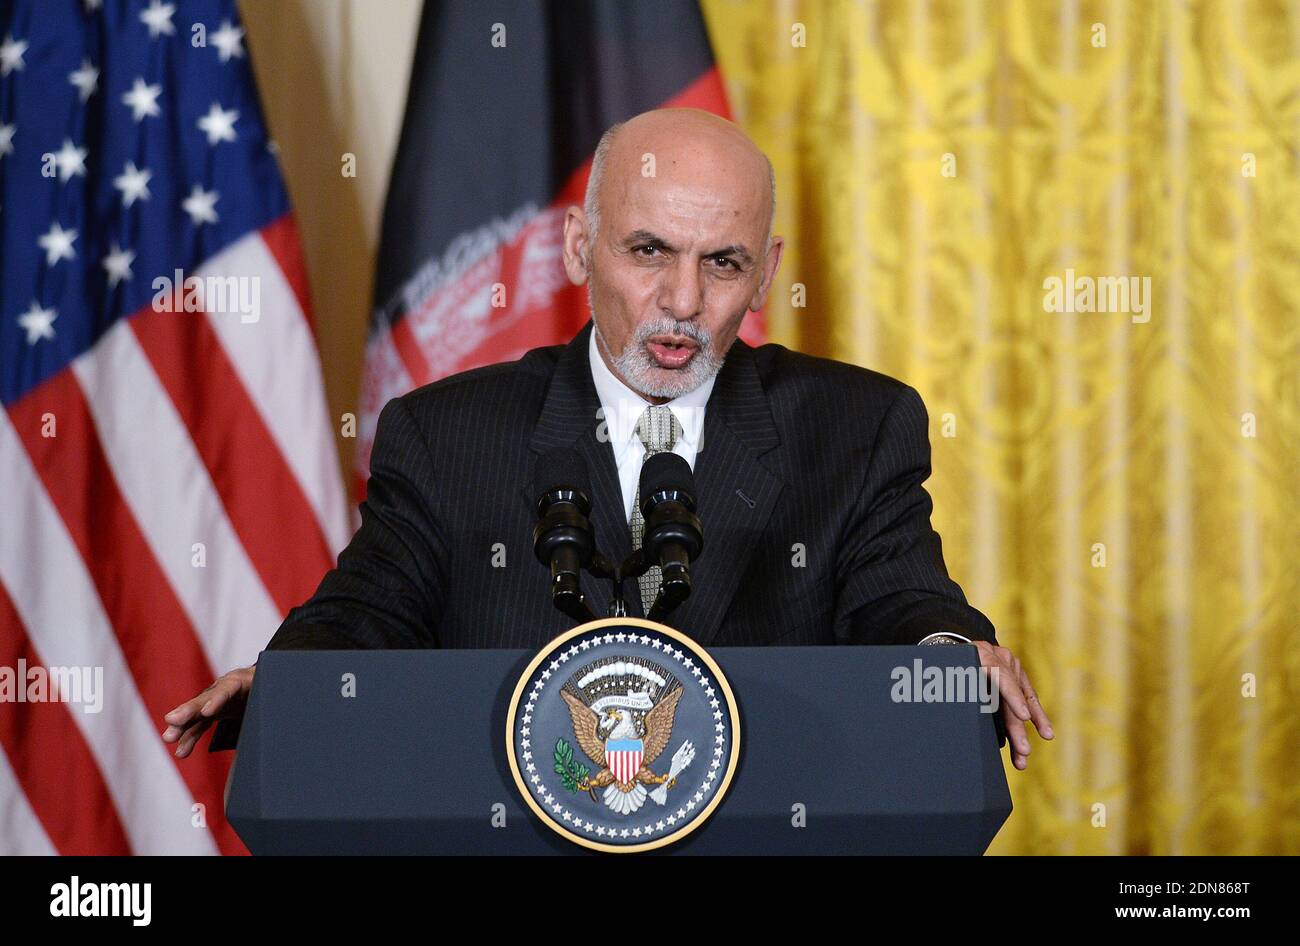 Afghan President Ashraf Ghani speaks during a joint press conference with President Barack Obama in the East Room of the White House on Tuesday, March 24, 2015, in Washington, DC, USA. Photo by Olivier Douliery/ABACAPRESS.COM Stock Photo